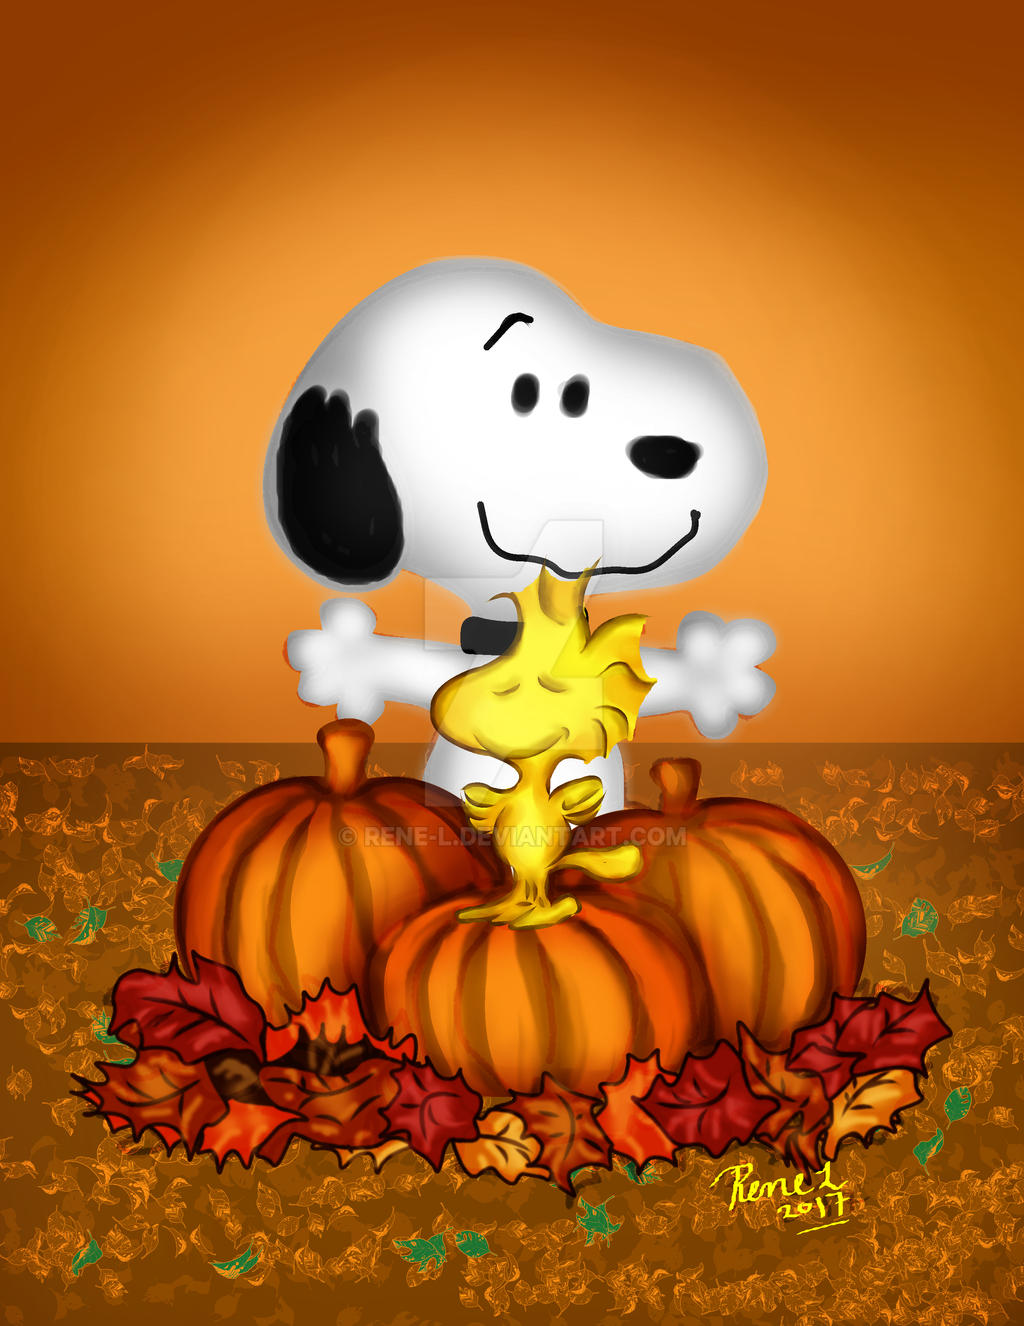 Snoopy and Woodstock love Fall by Rene-L on DeviantArt